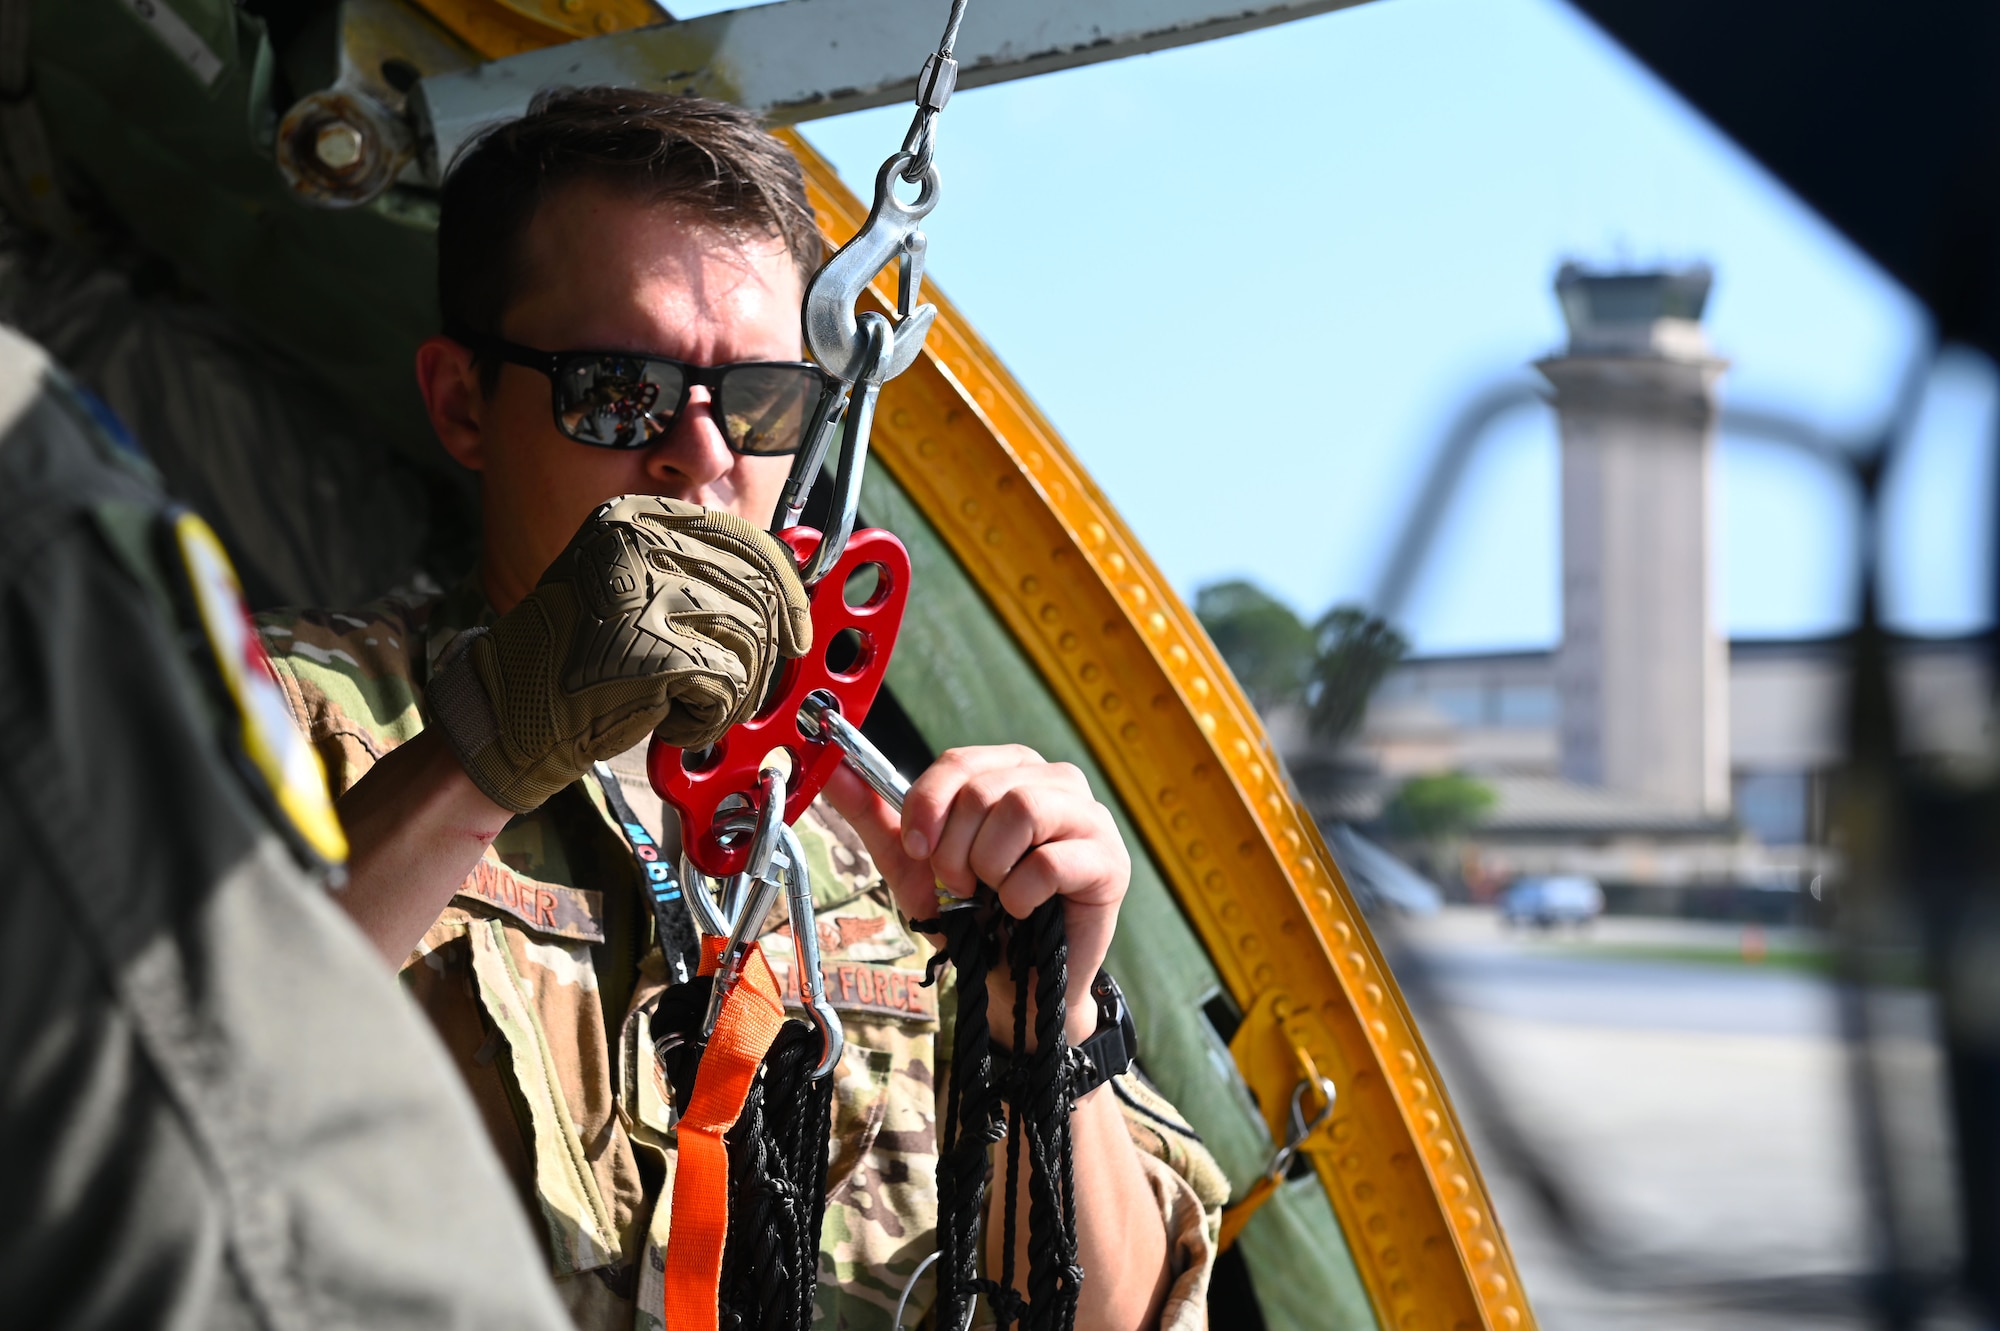 U.S. Air Force Tech. Sgt. Nicholas Sowder, 509th Weapons Squadron Advanced Instructor Training cadre and inflight refueling specialist, prepares to unload cargo using the Pack and Transport Reloader (PATR) crane prototype at Hurlburt Field, Florida, May 6, 2023. Airmen from the 509th WPS tested a new prototype PATR crane during an integration training at a special operations forces exercise at Hurlburt Field. (U.S. Air Force photo by Staff Sgt. Lawrence Sena)